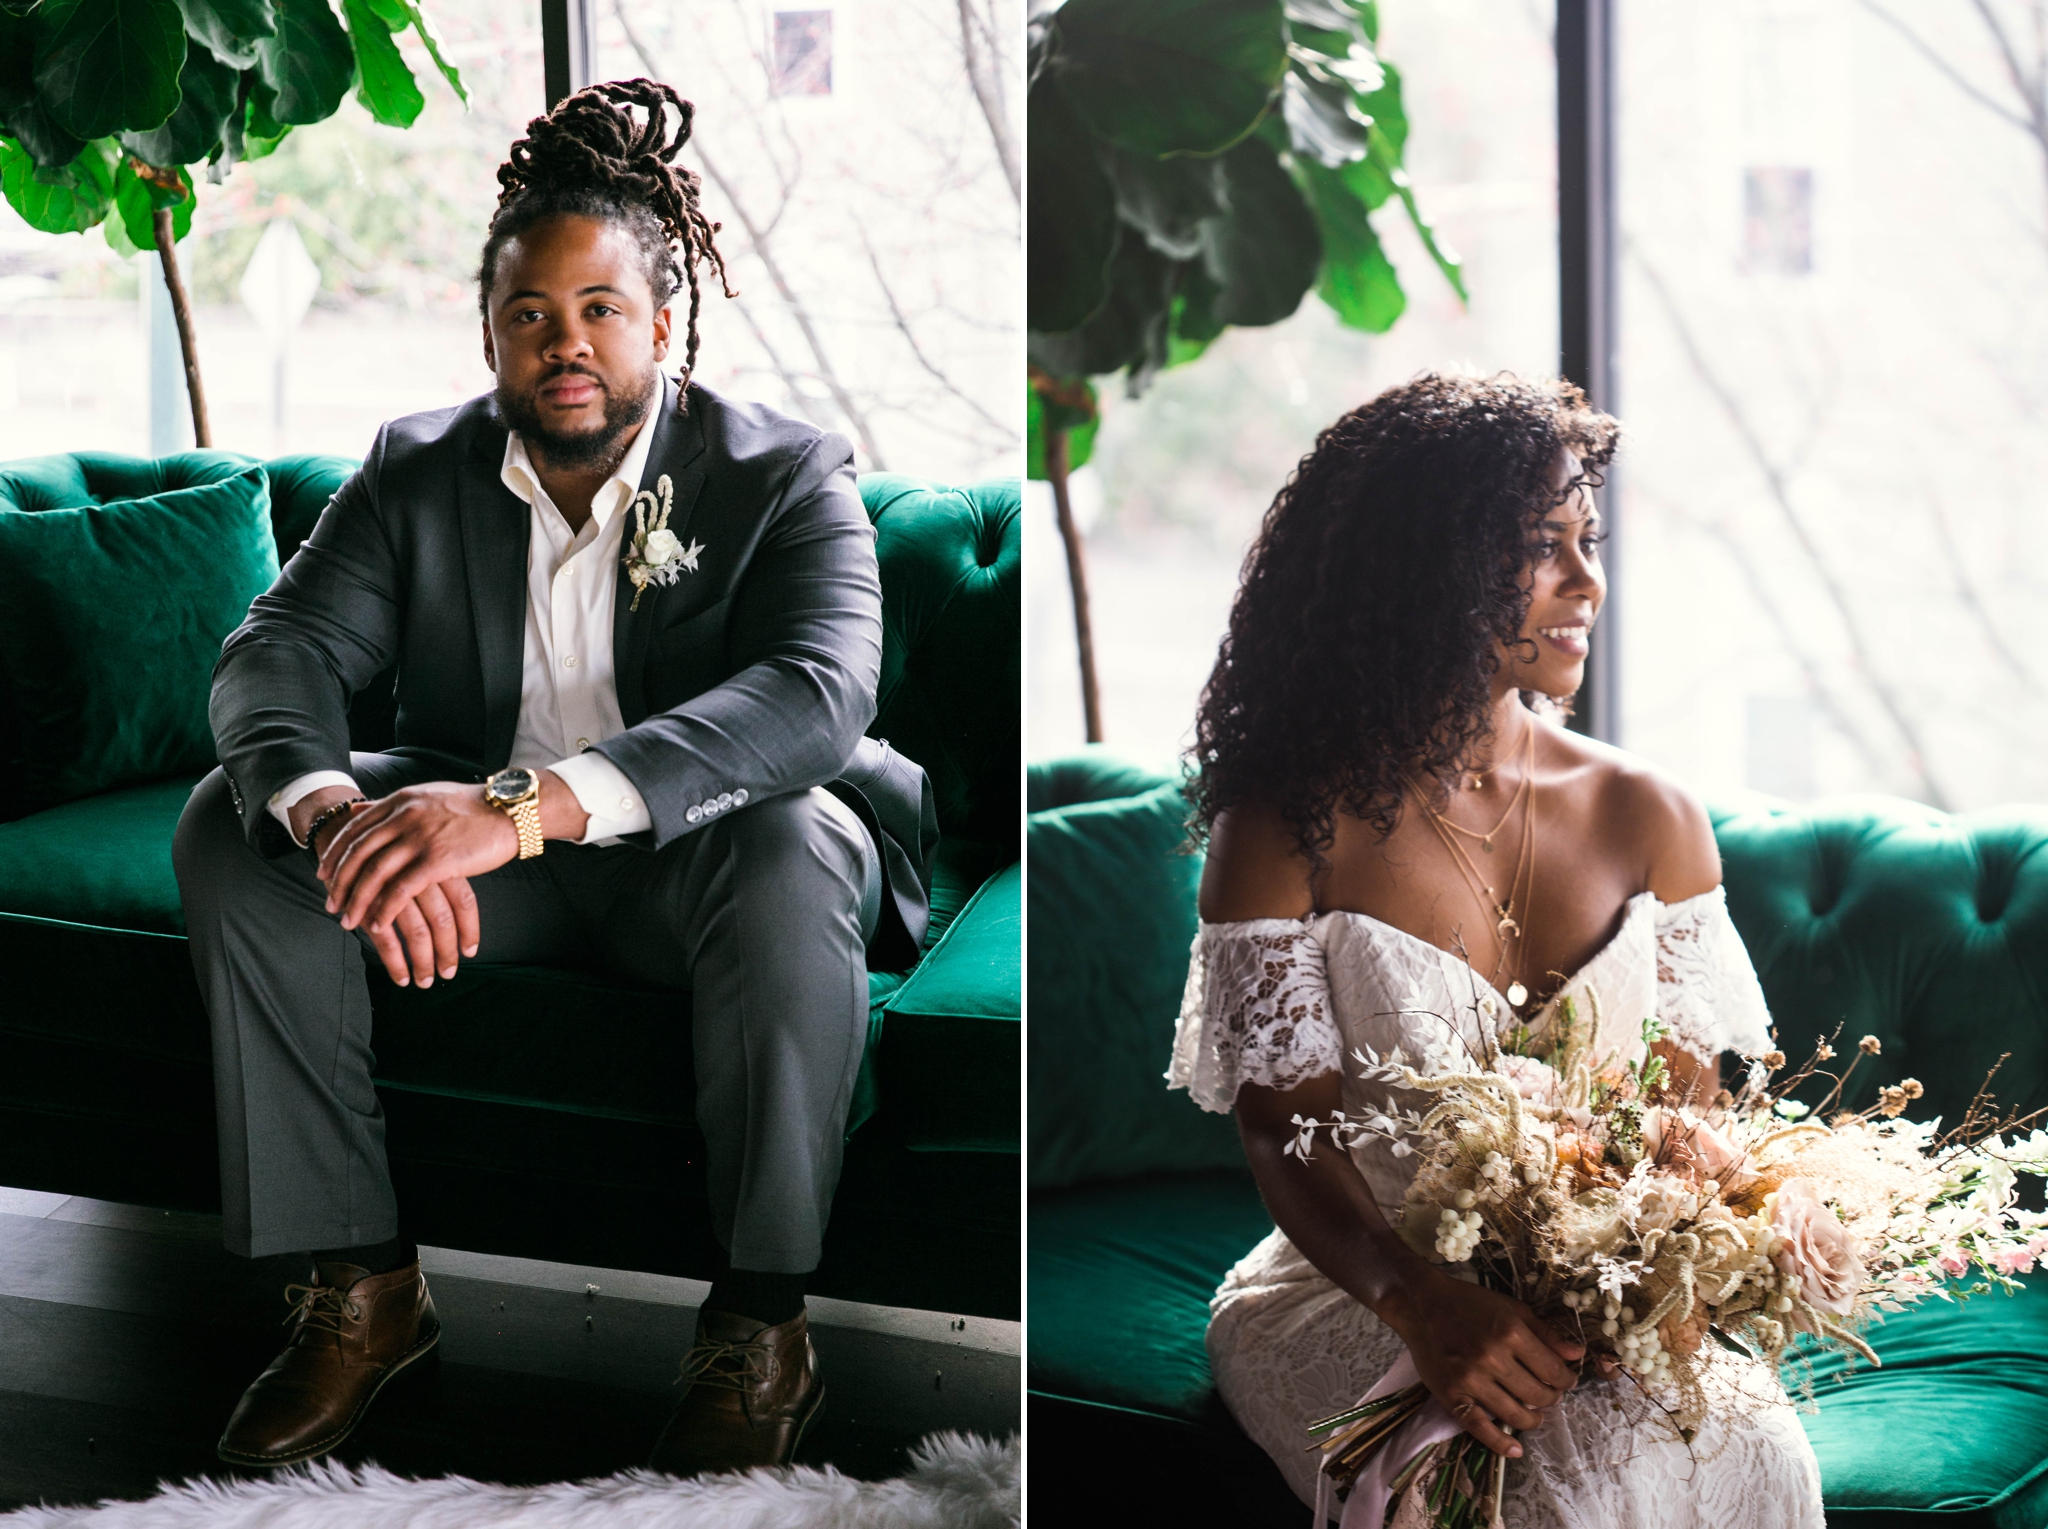  Indoor Natural light portrait of a black bride  in a boho wedding dress and her groom sitting on an emerald tufted sofa - laughing and having fun with each other- flowers in natural african american hair - oahu hawaii wedding photographer 